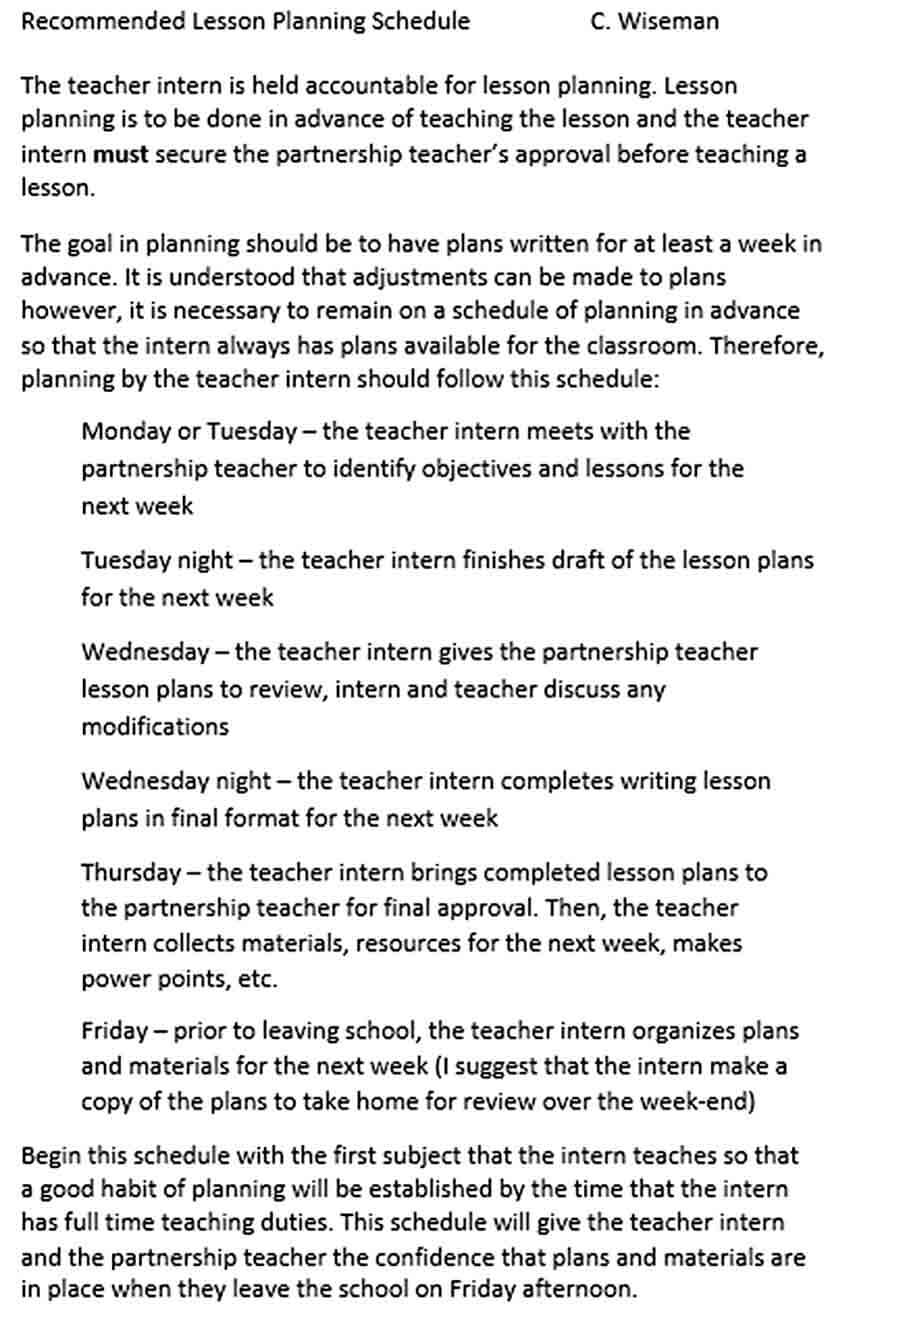 Recommended Lesson Planning Schedule